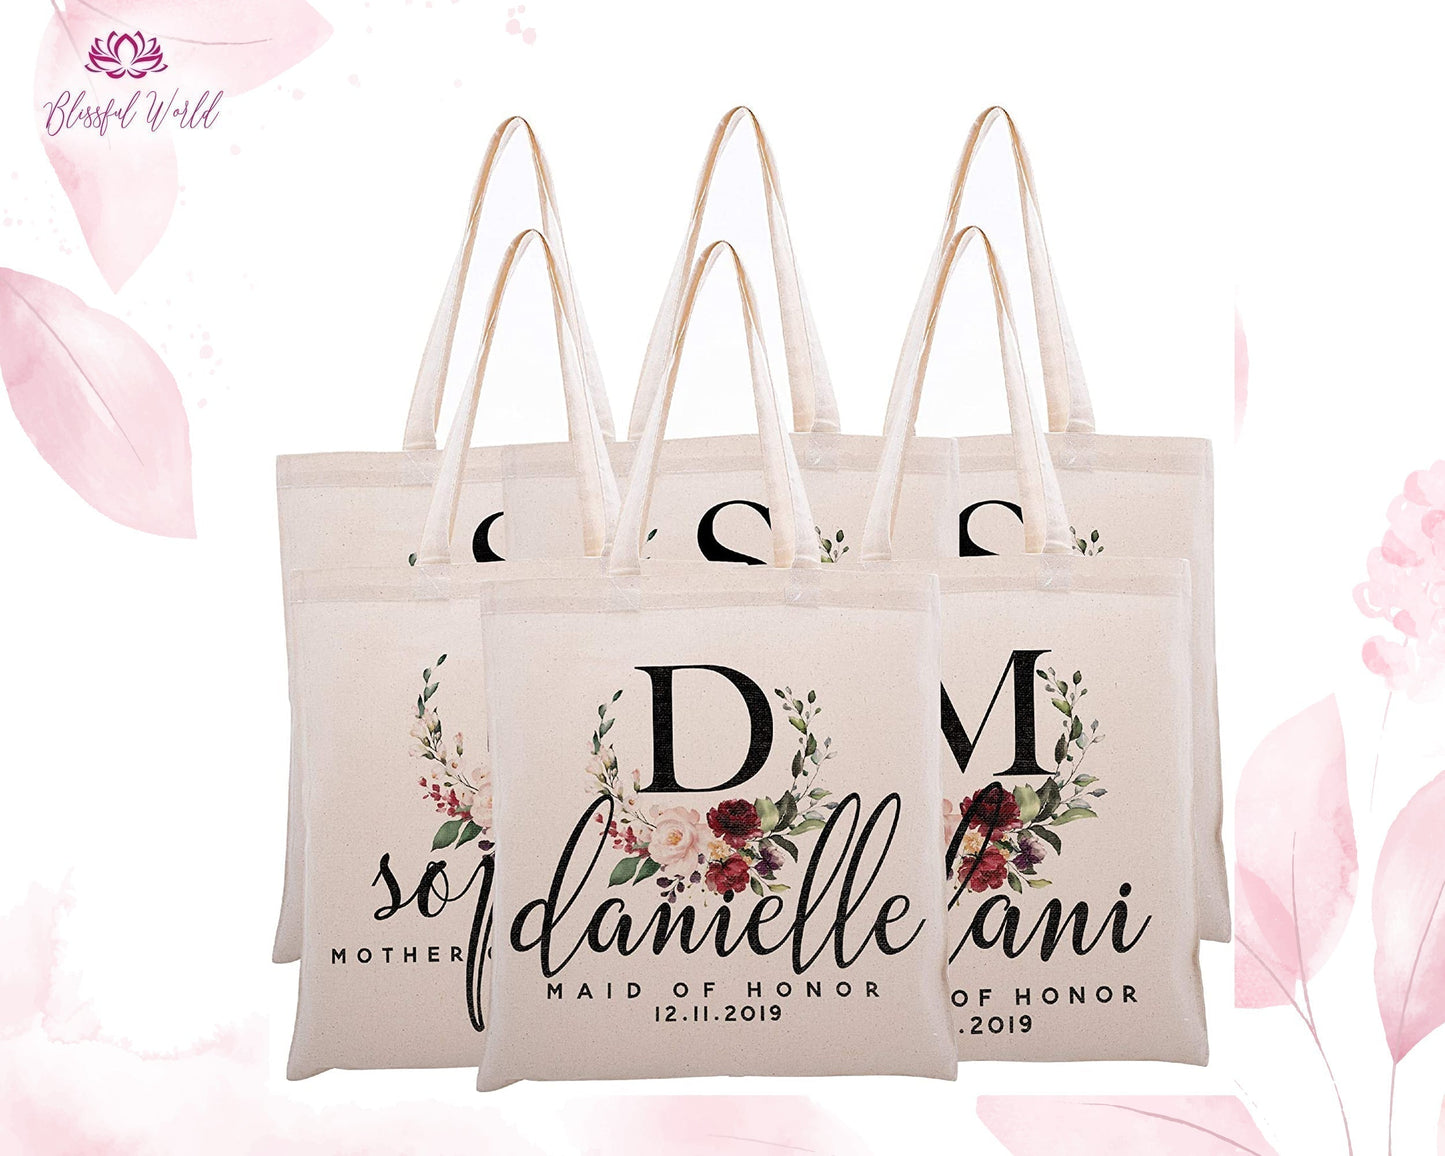 Personalized Gift Bags Party Favors, Bridal Party Totes, Bridesmaid Proposal Tote Gift Bags, Bride To Be Gifts, Wedding Gifts, Bachelorette